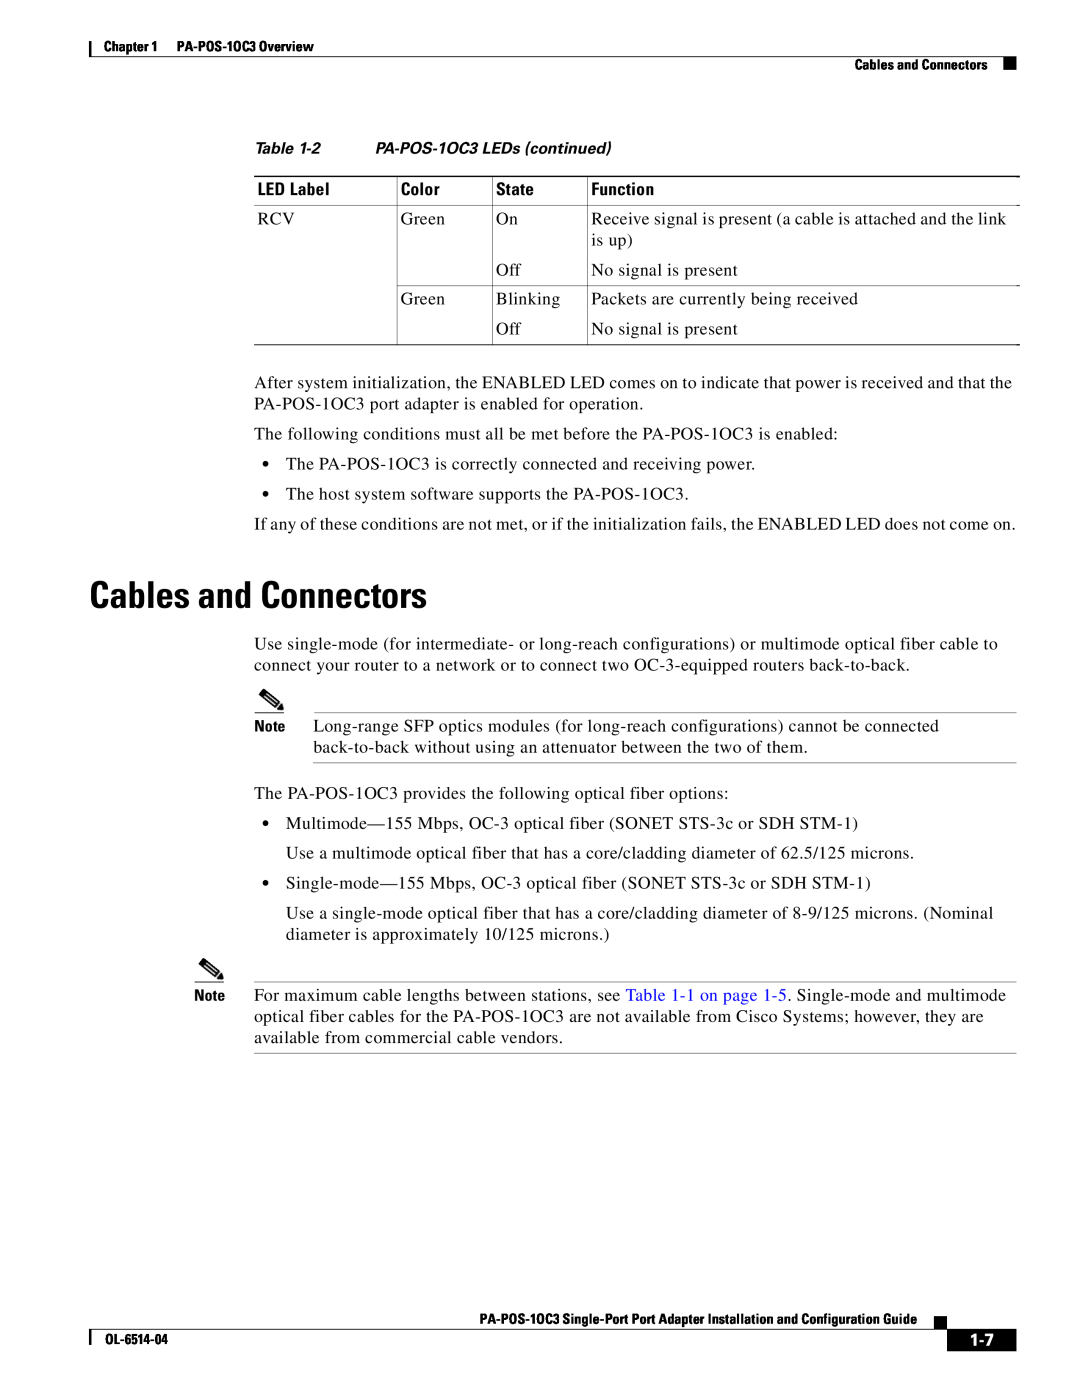 Cisco Systems PA-POS-1OC3, PA-POS-2OC3 manual Cables and Connectors, LED Label, Color, State, Function 